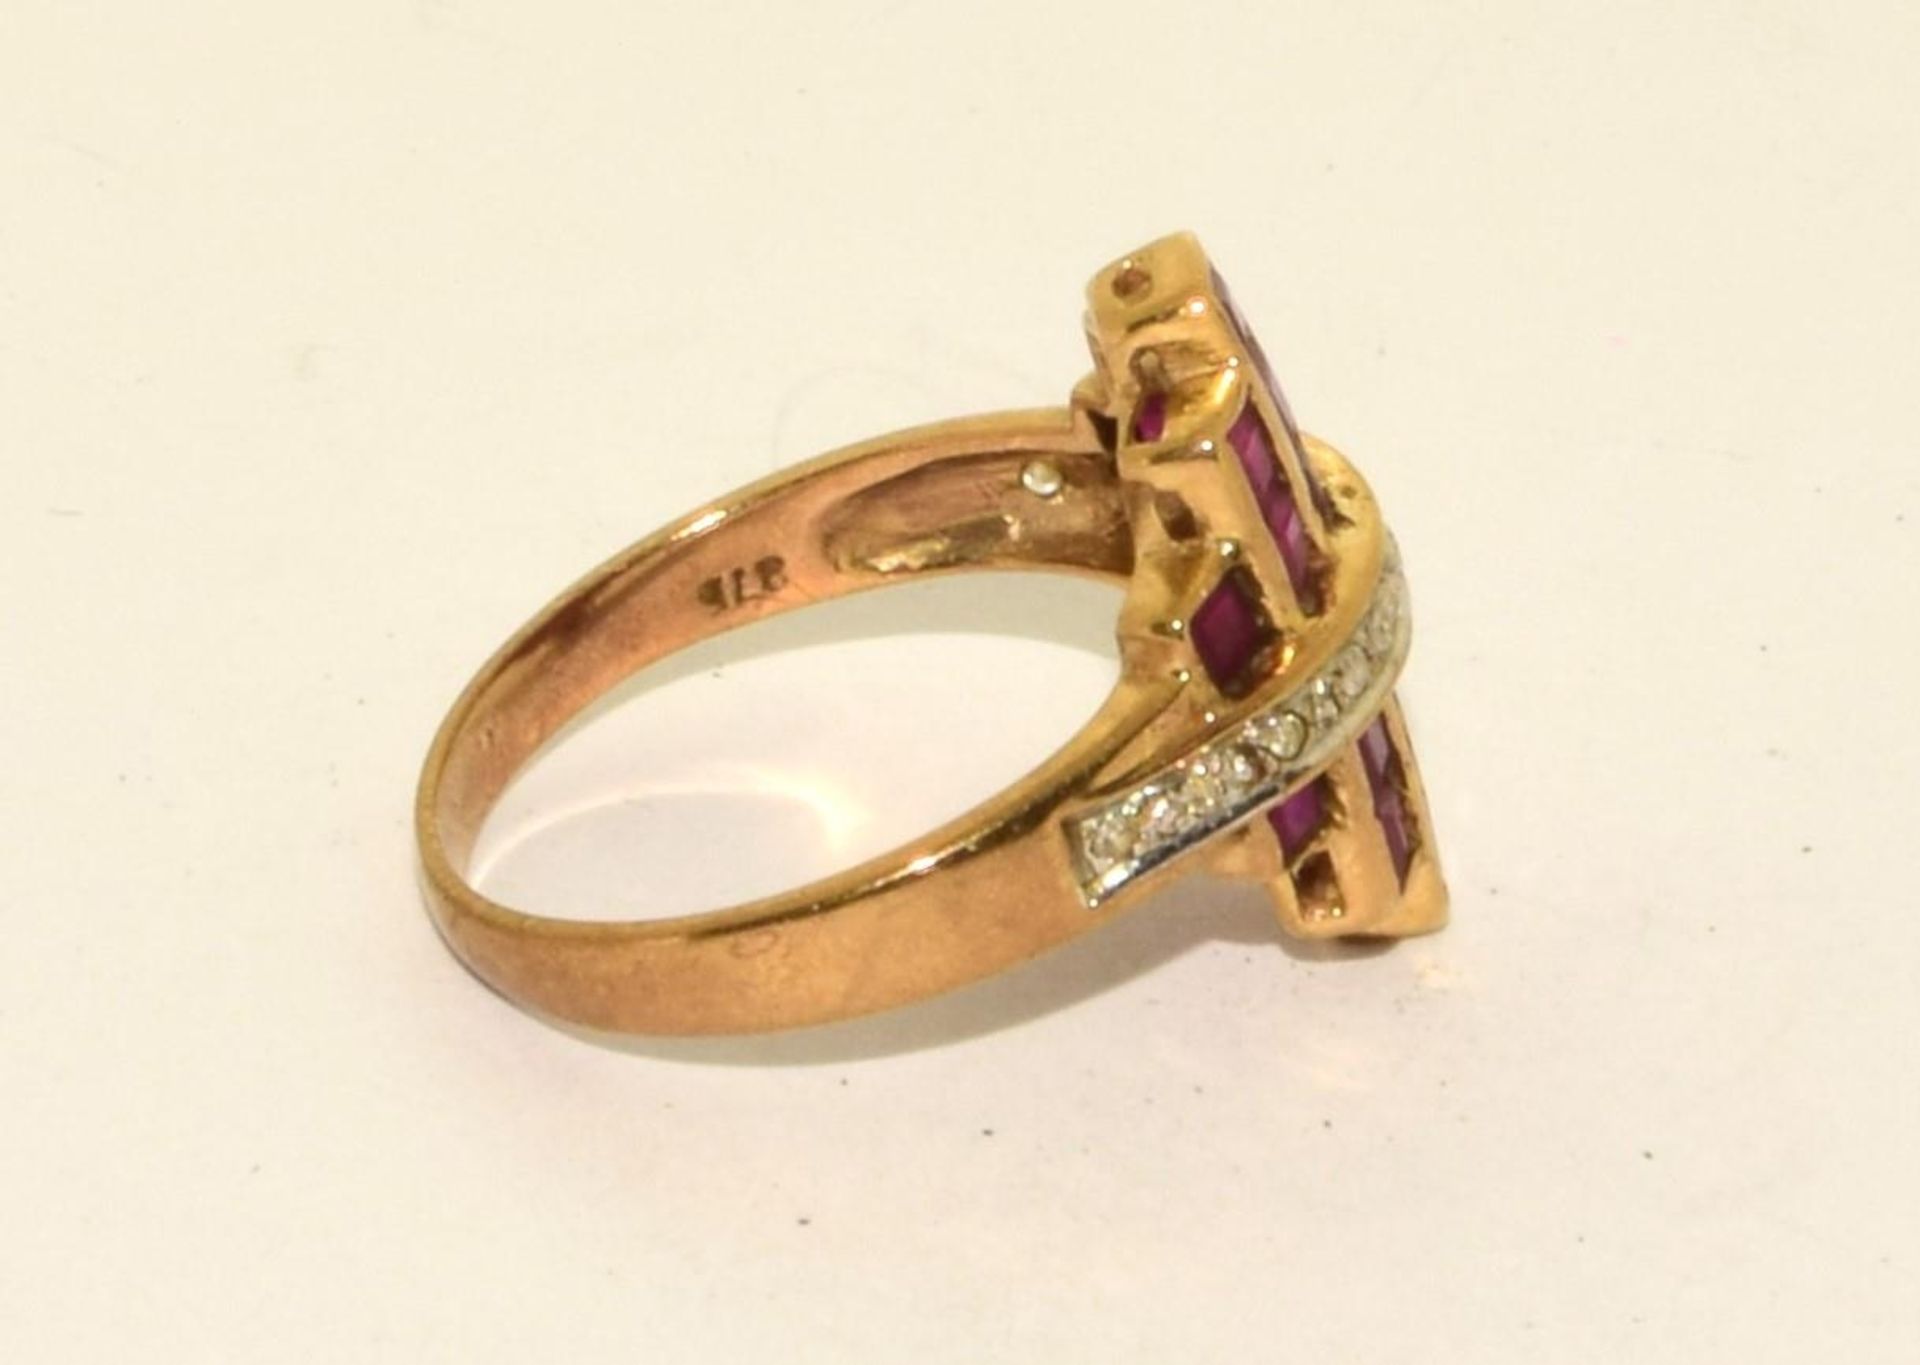 9ct gold art deco design Diamond and Ruby ring size N ref 65 - Image 4 of 5